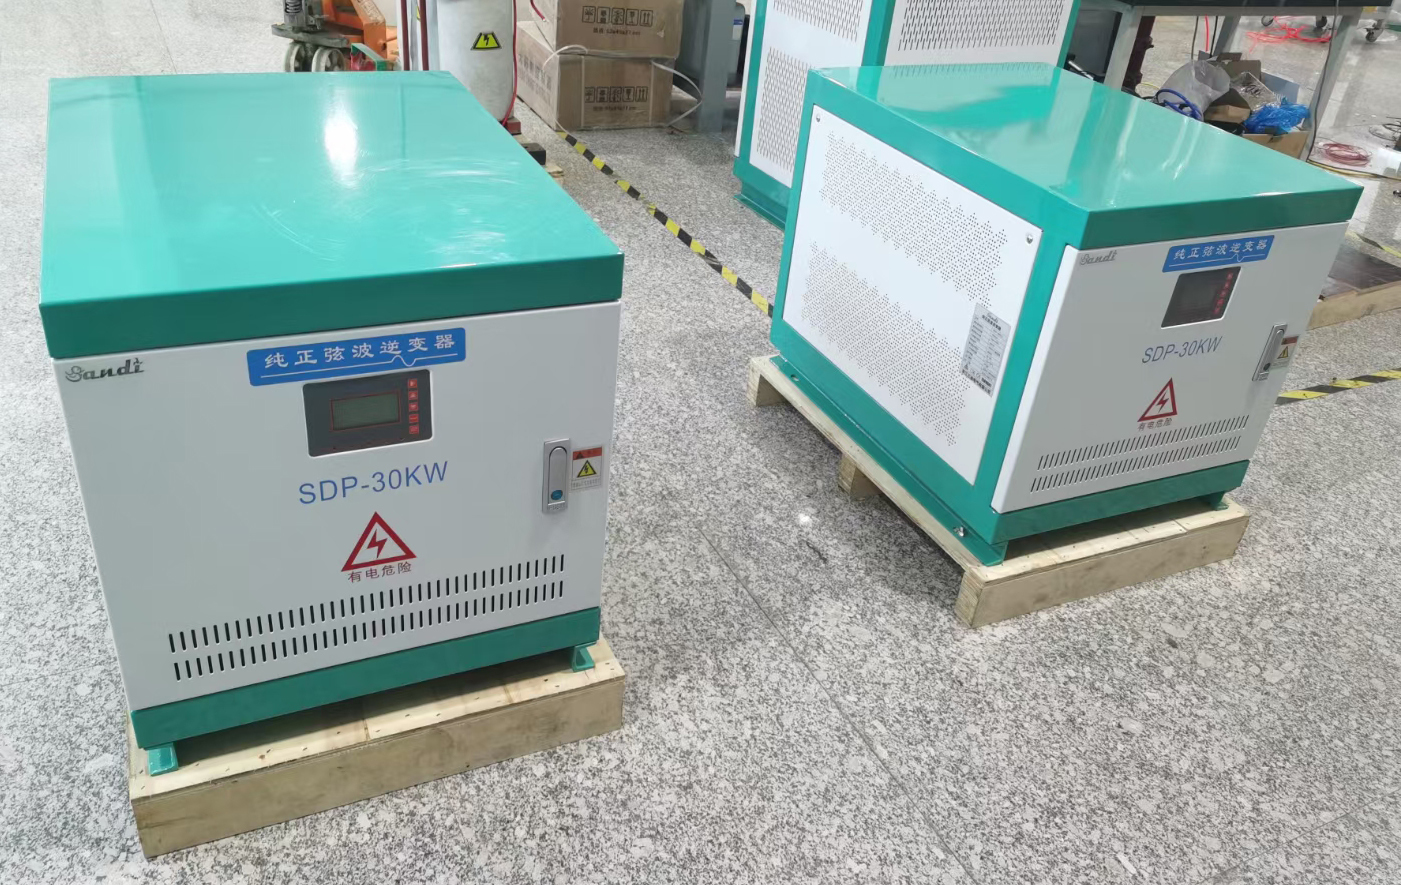 30KWH lifepo4 lithium battery - 10kw/12kw inverter- AC/DC charger system for industrial mobile vehicle application